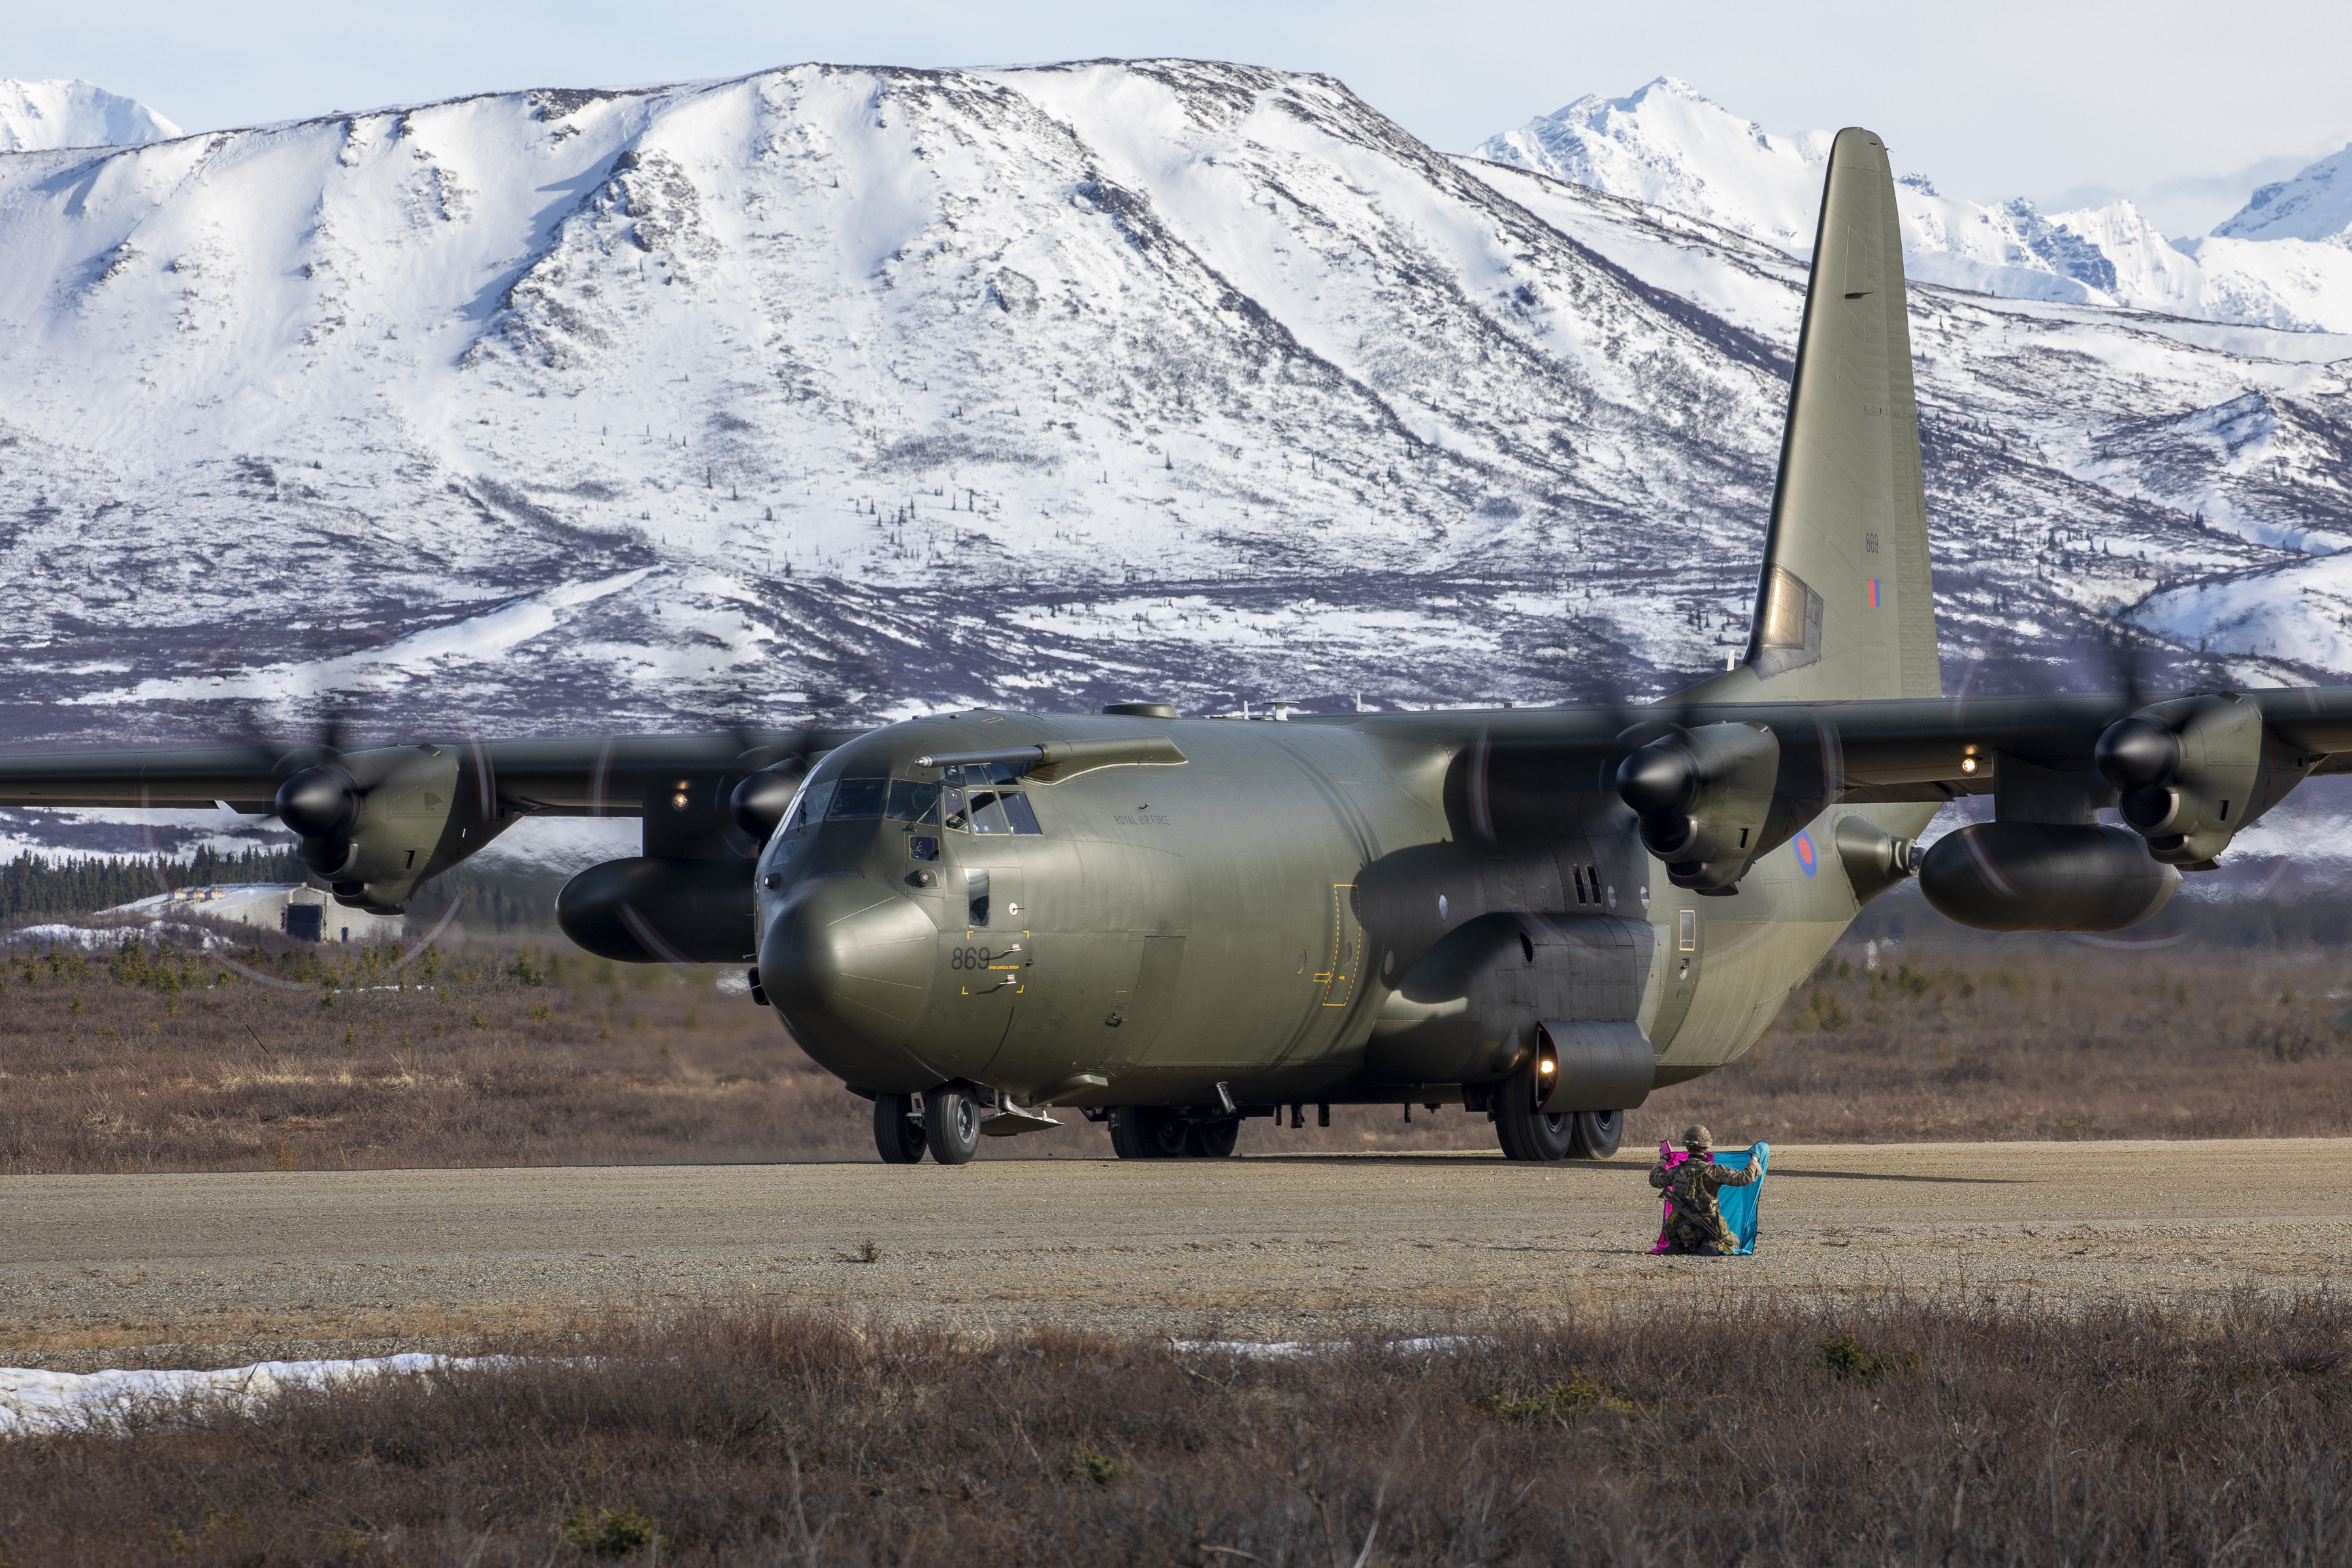 Personnel from Number 47 Squadron, based at RAF Brize Norton, have been training with coalition partners on Exercise Red Flag Alaska 22-1